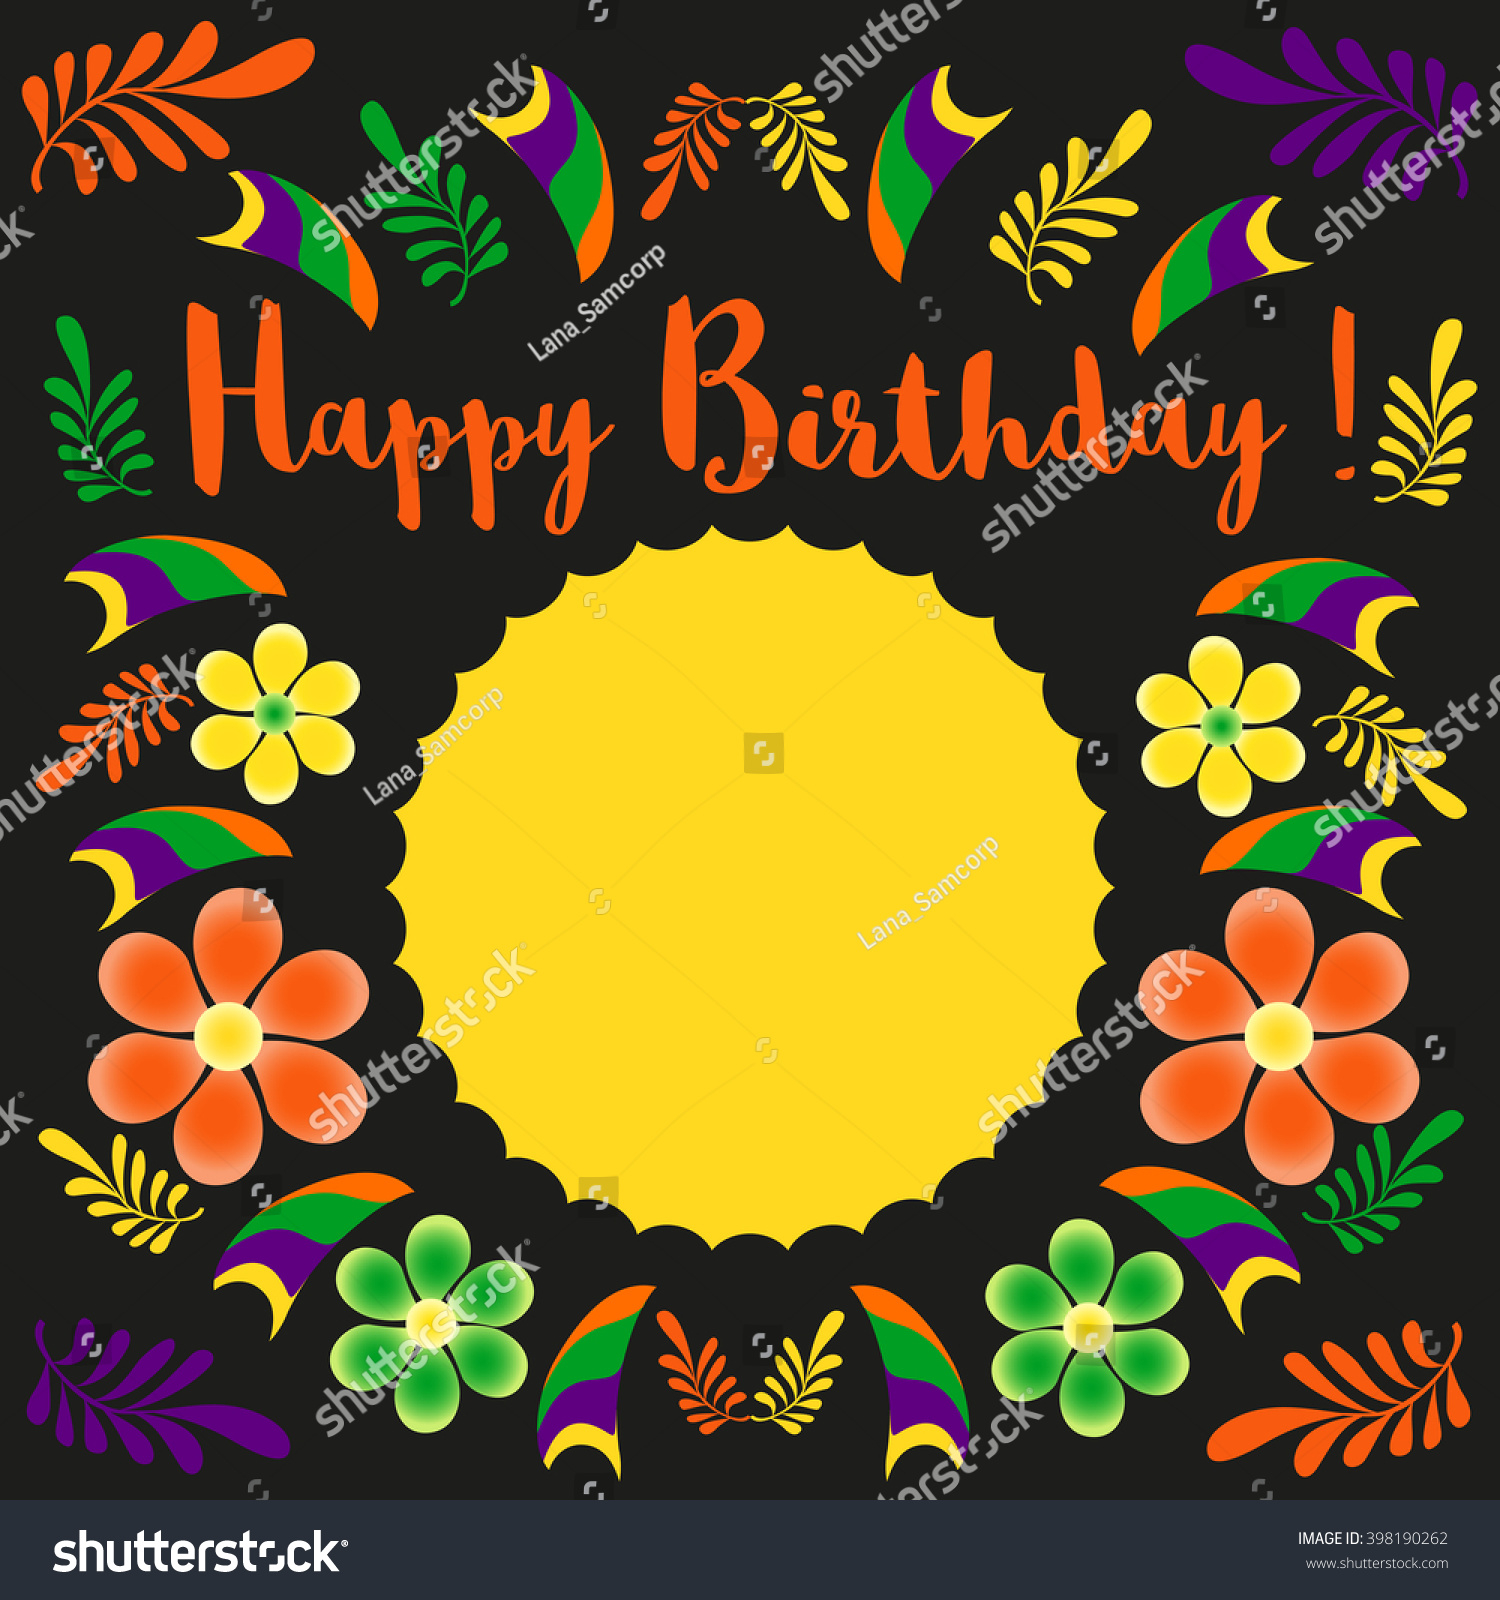 Poster Birthday Card Ideas 008 Template Ideas Stock Vector Happy Birthday Card Poster On Party